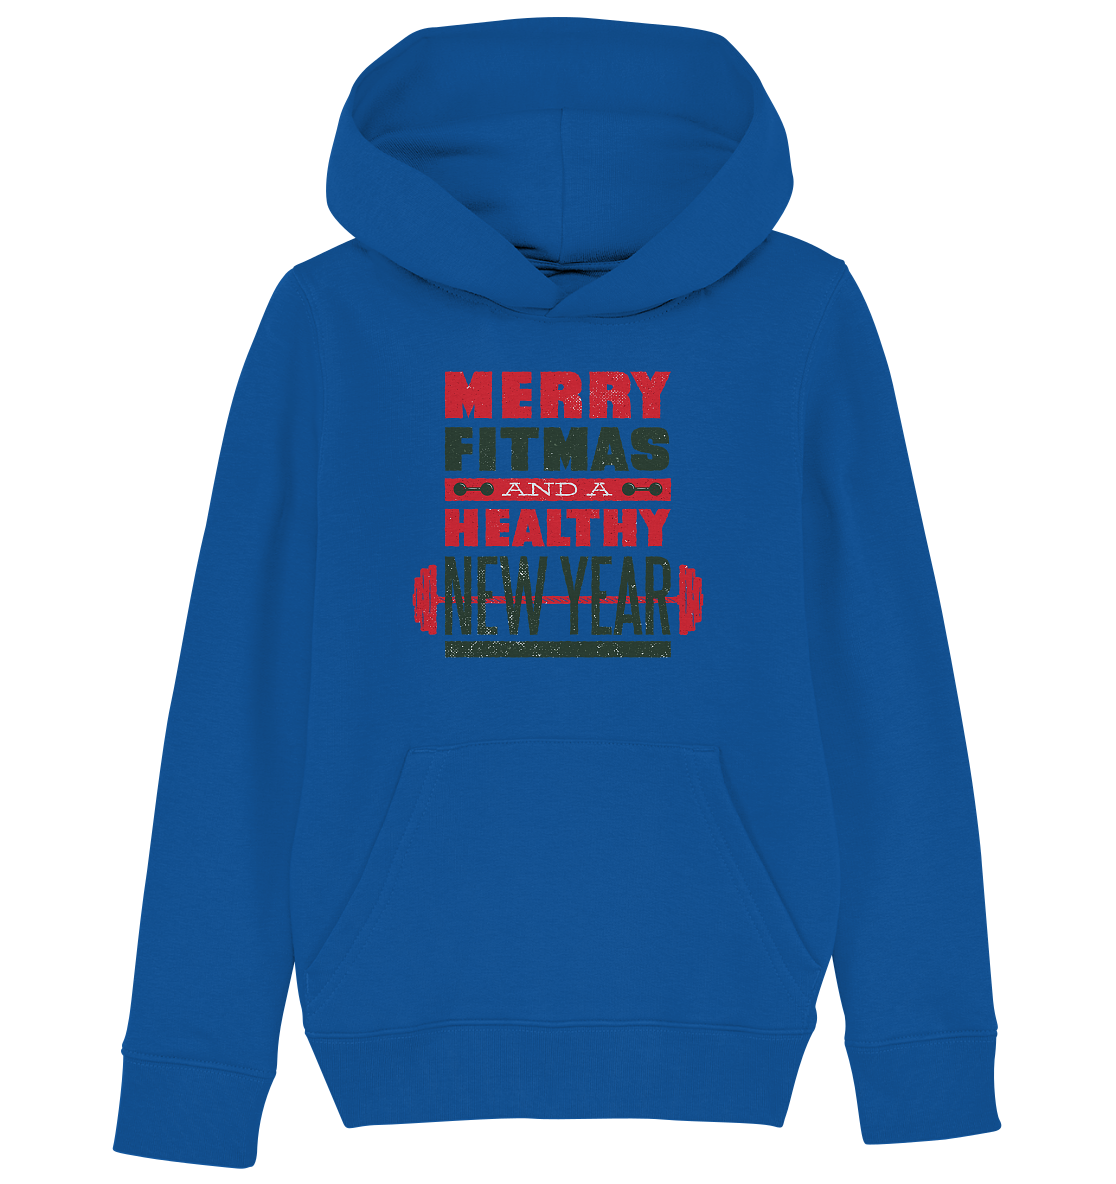 Christmas design, Gym, Merry Fitmas and a Healthy New Year - Kids Organic Hoodie